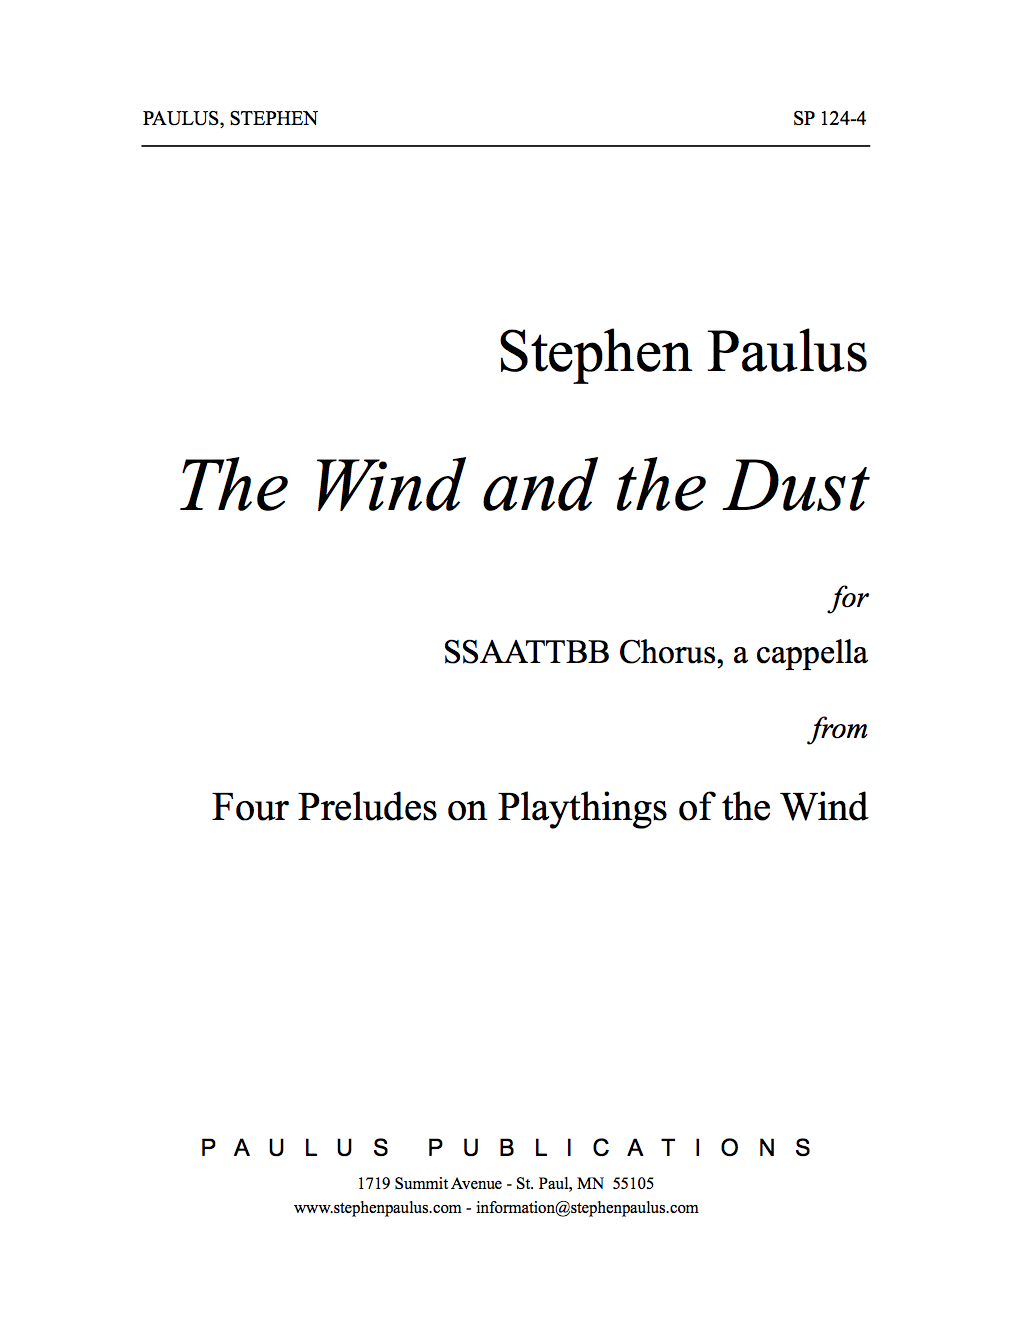 The Wind and The Dust (Four Preludes on Playthings of the Wind)